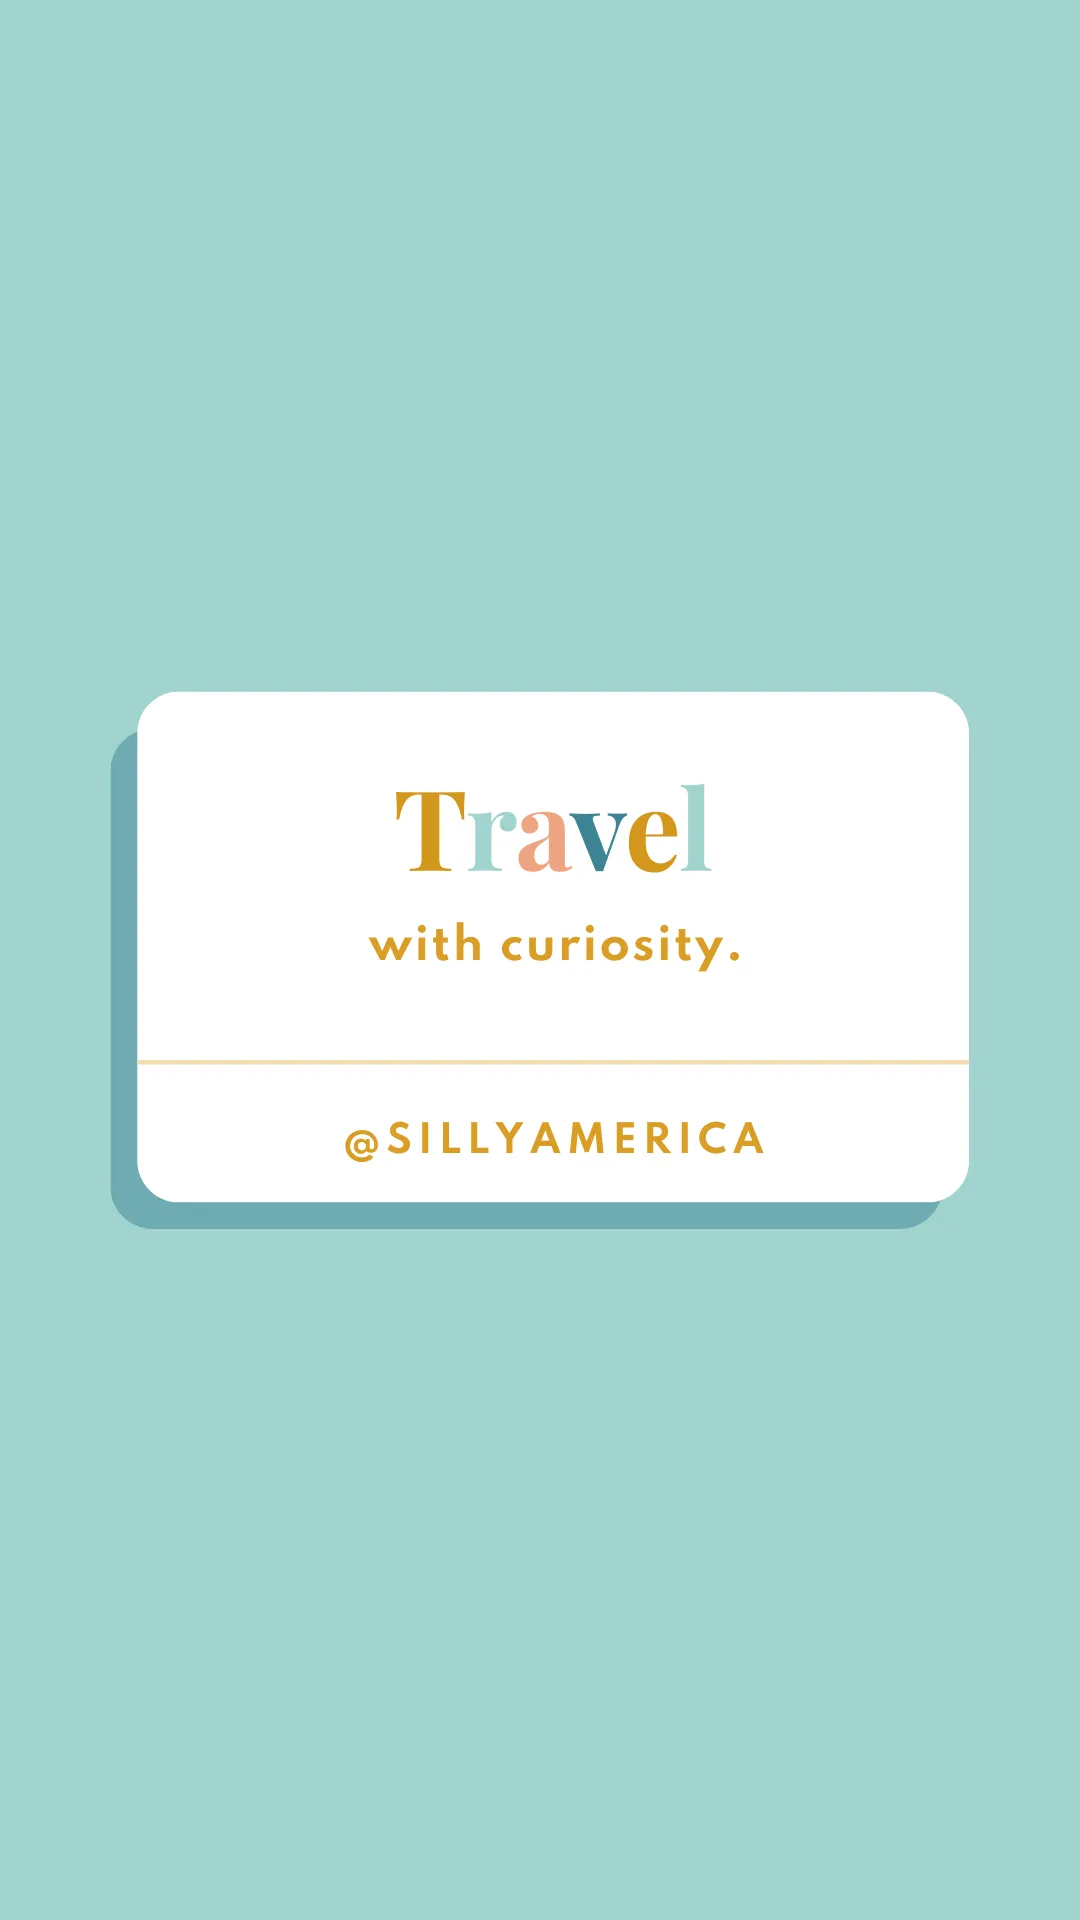 Travel with curiosity. - Road Trip Captions for Instagram